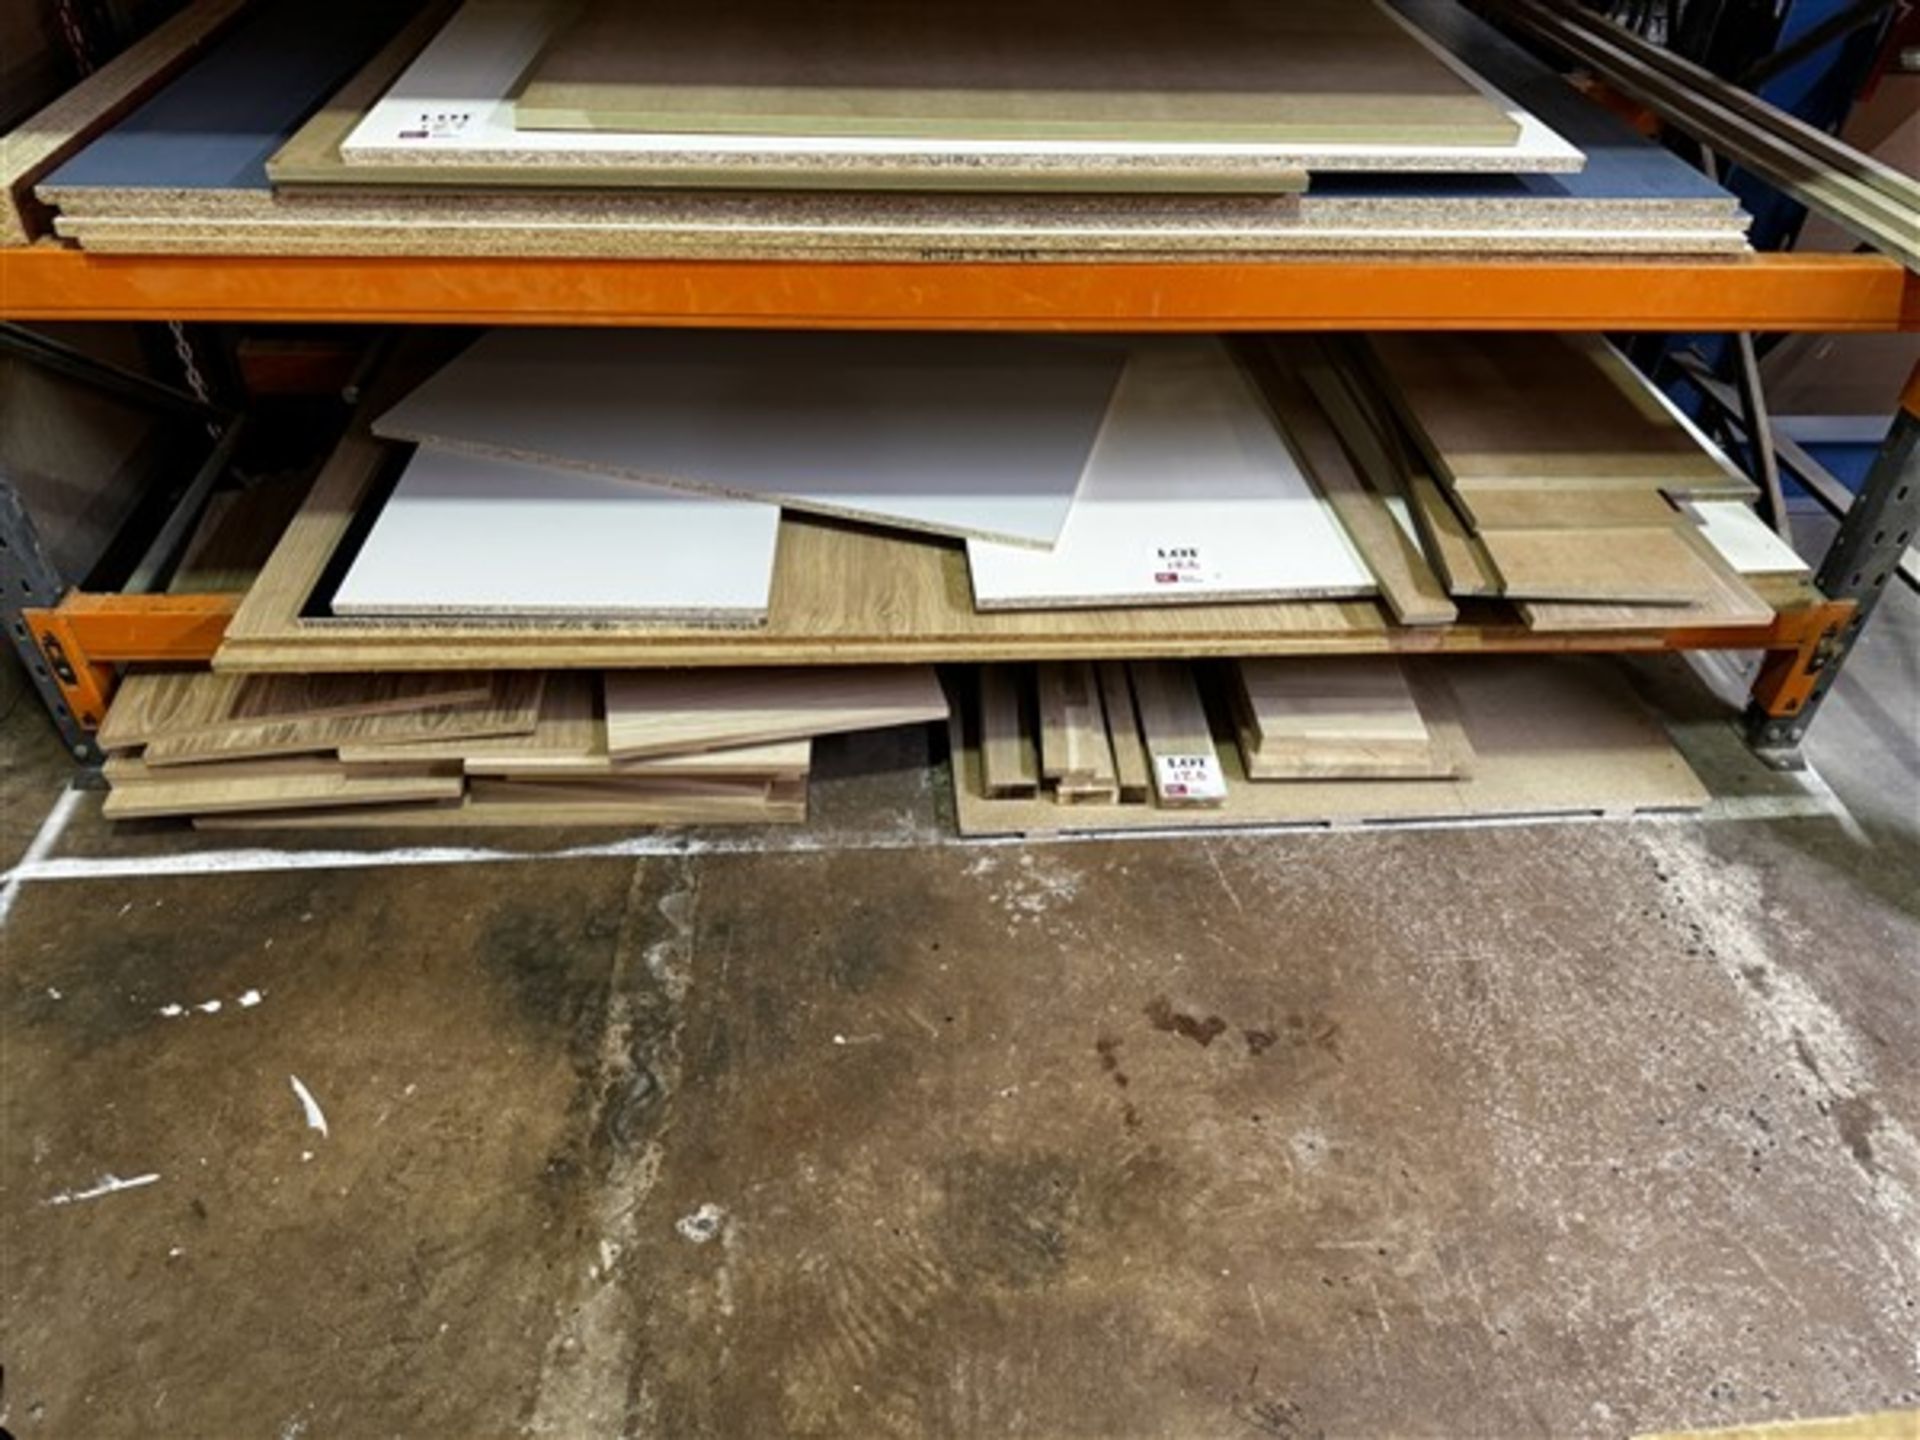 Bottom 2 bays of large sheets and offcut wood